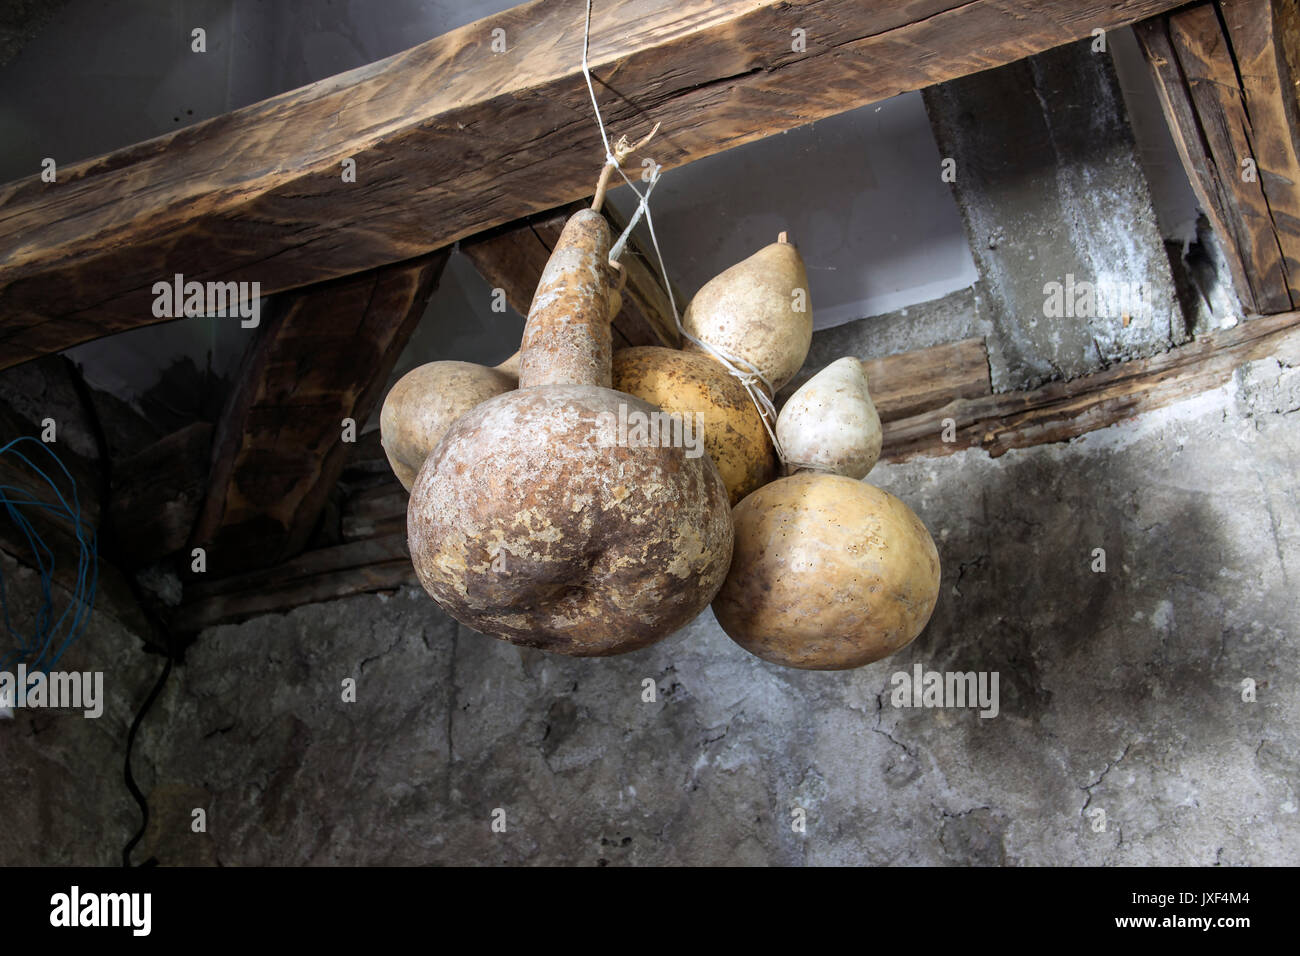 East Serbia - Dried gourds hanging from a ceiling beam in the winery Stock Photo